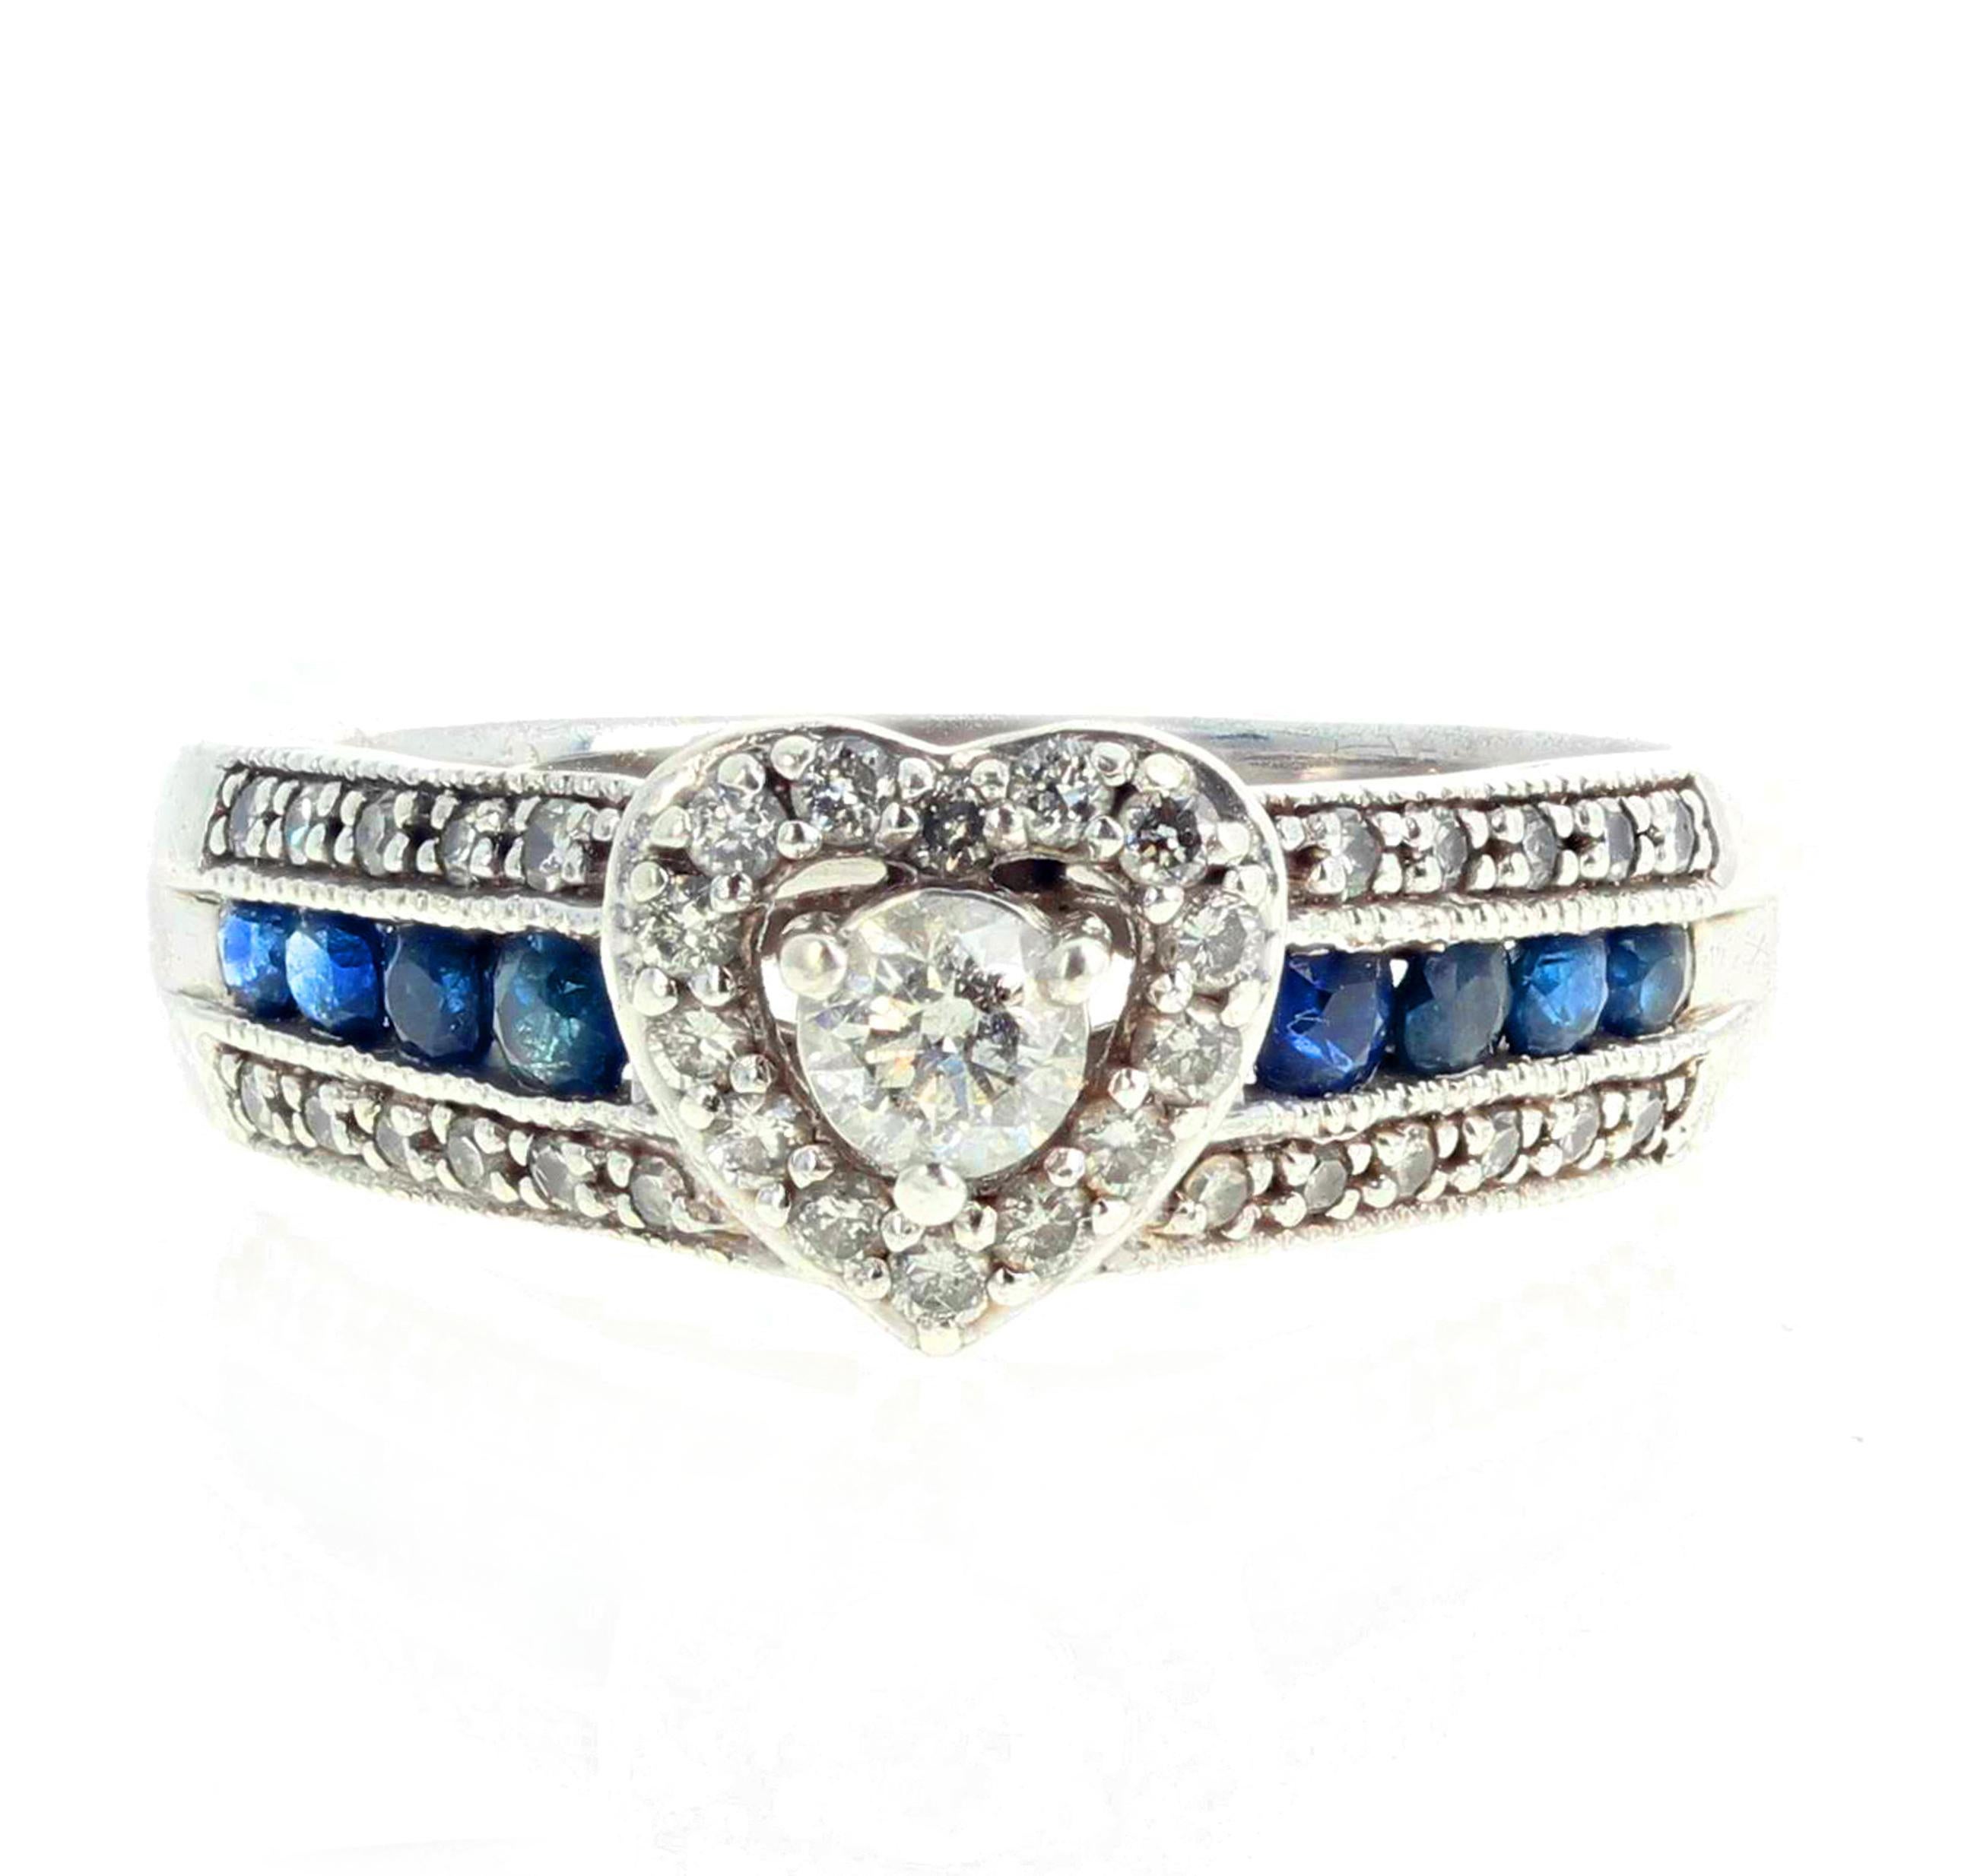 Glittering Diamond  - round brilliant cut center gemstone I J 12 color and clarity - and Blue Sapphire ring set in Sterling Silver and 5% Platinum so it is always beautifully shiny.  The center White Diamond is 3/8 carat.  It is enhanced with lovely